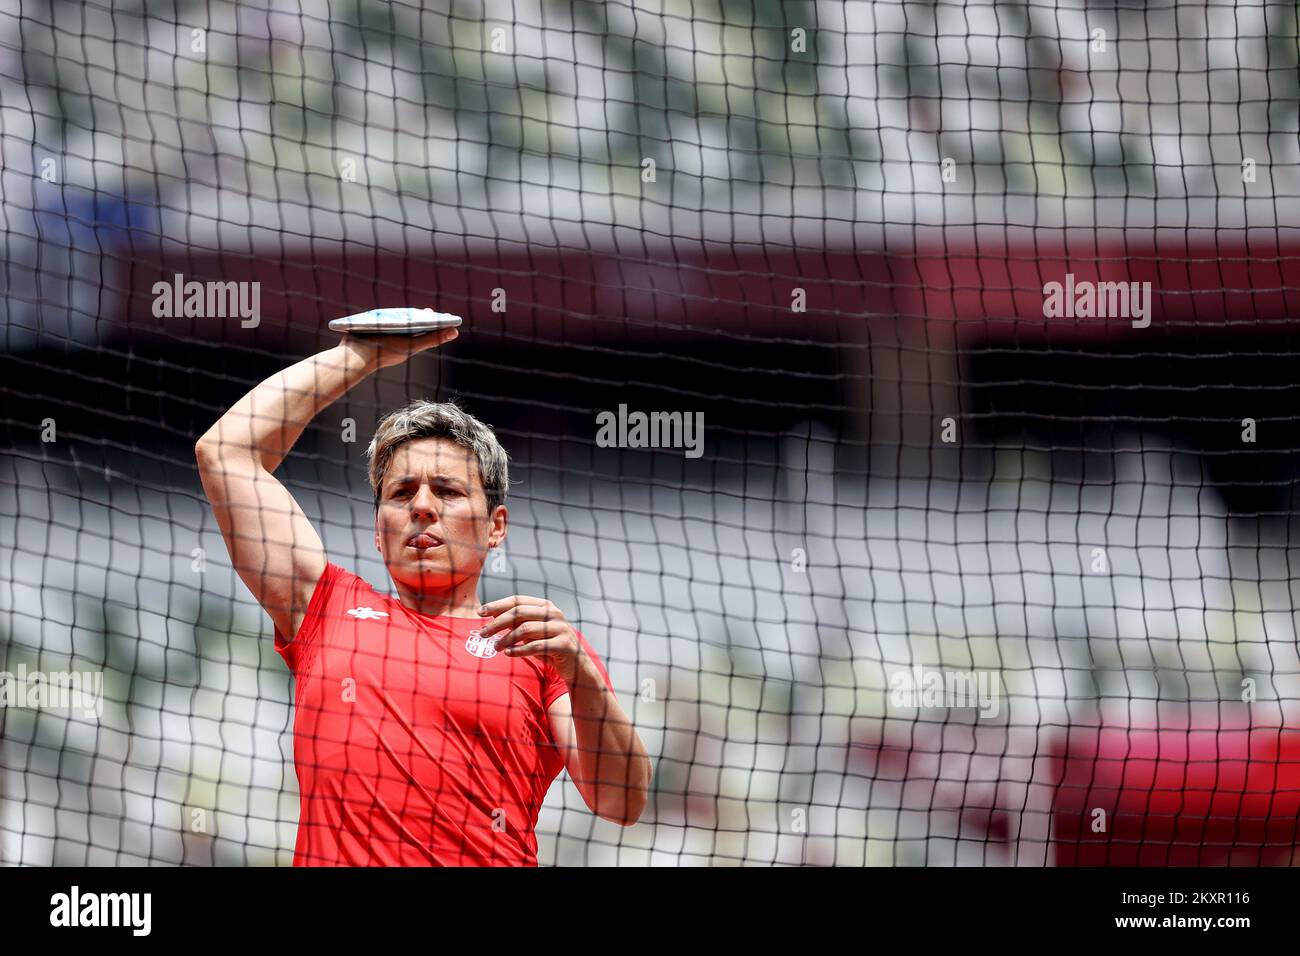 TOKYO, JAPAN - JULY 31: Dragana Tomasevic of Team Serbia competes in the Women's Discus Throw Qualification on day eight of the Tokyo 2020 Olympic Games at Olympic Stadium on July 31, 2021 in Tokyo, Japan. Photo: Igor Kralj/PIXSELL Stock Photo